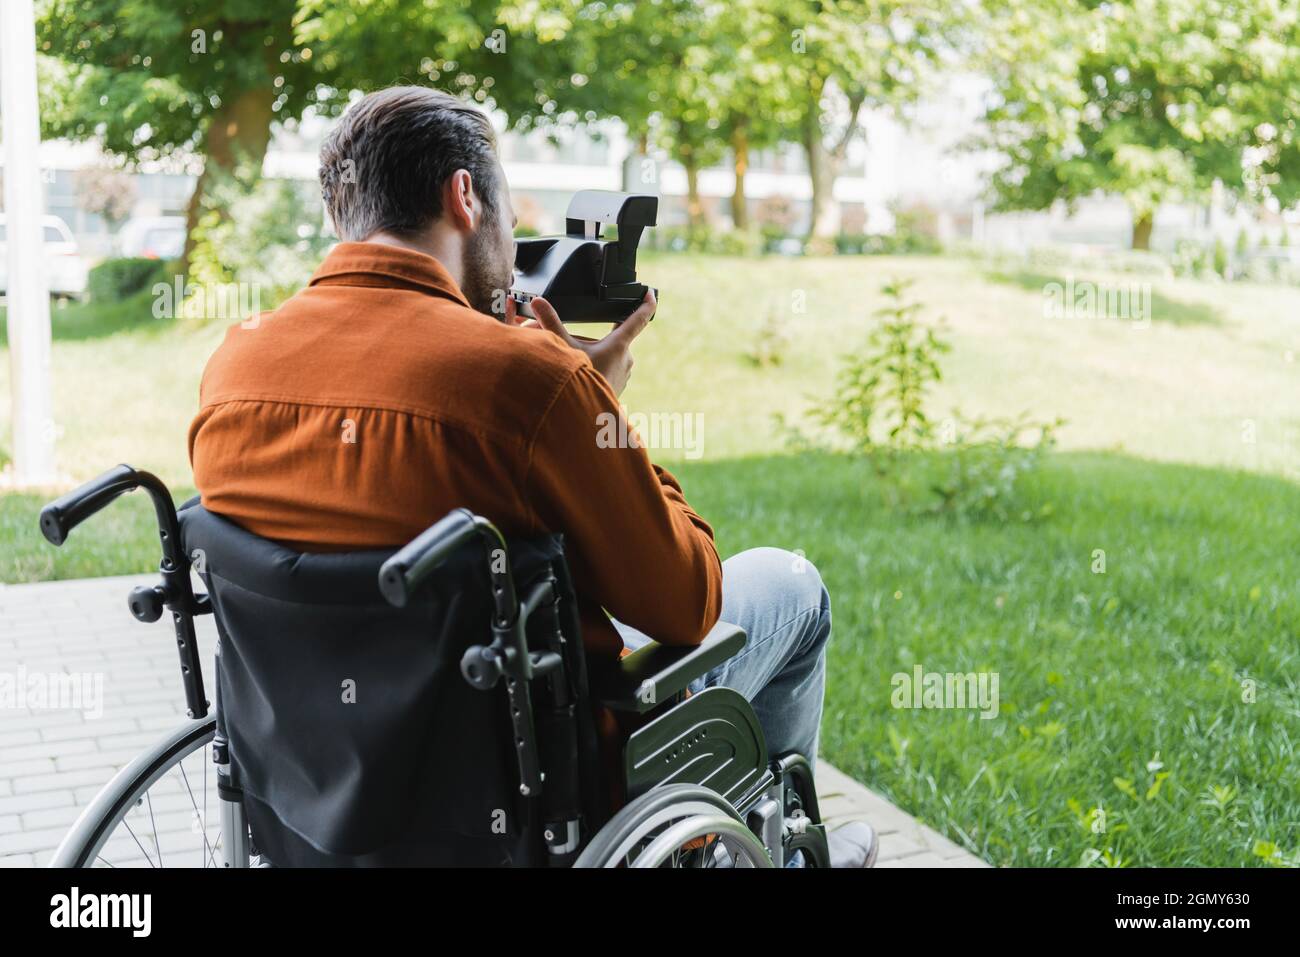 back view of handicapped man in wheelchair taking photo on vintage camera outdoors Stock Photo